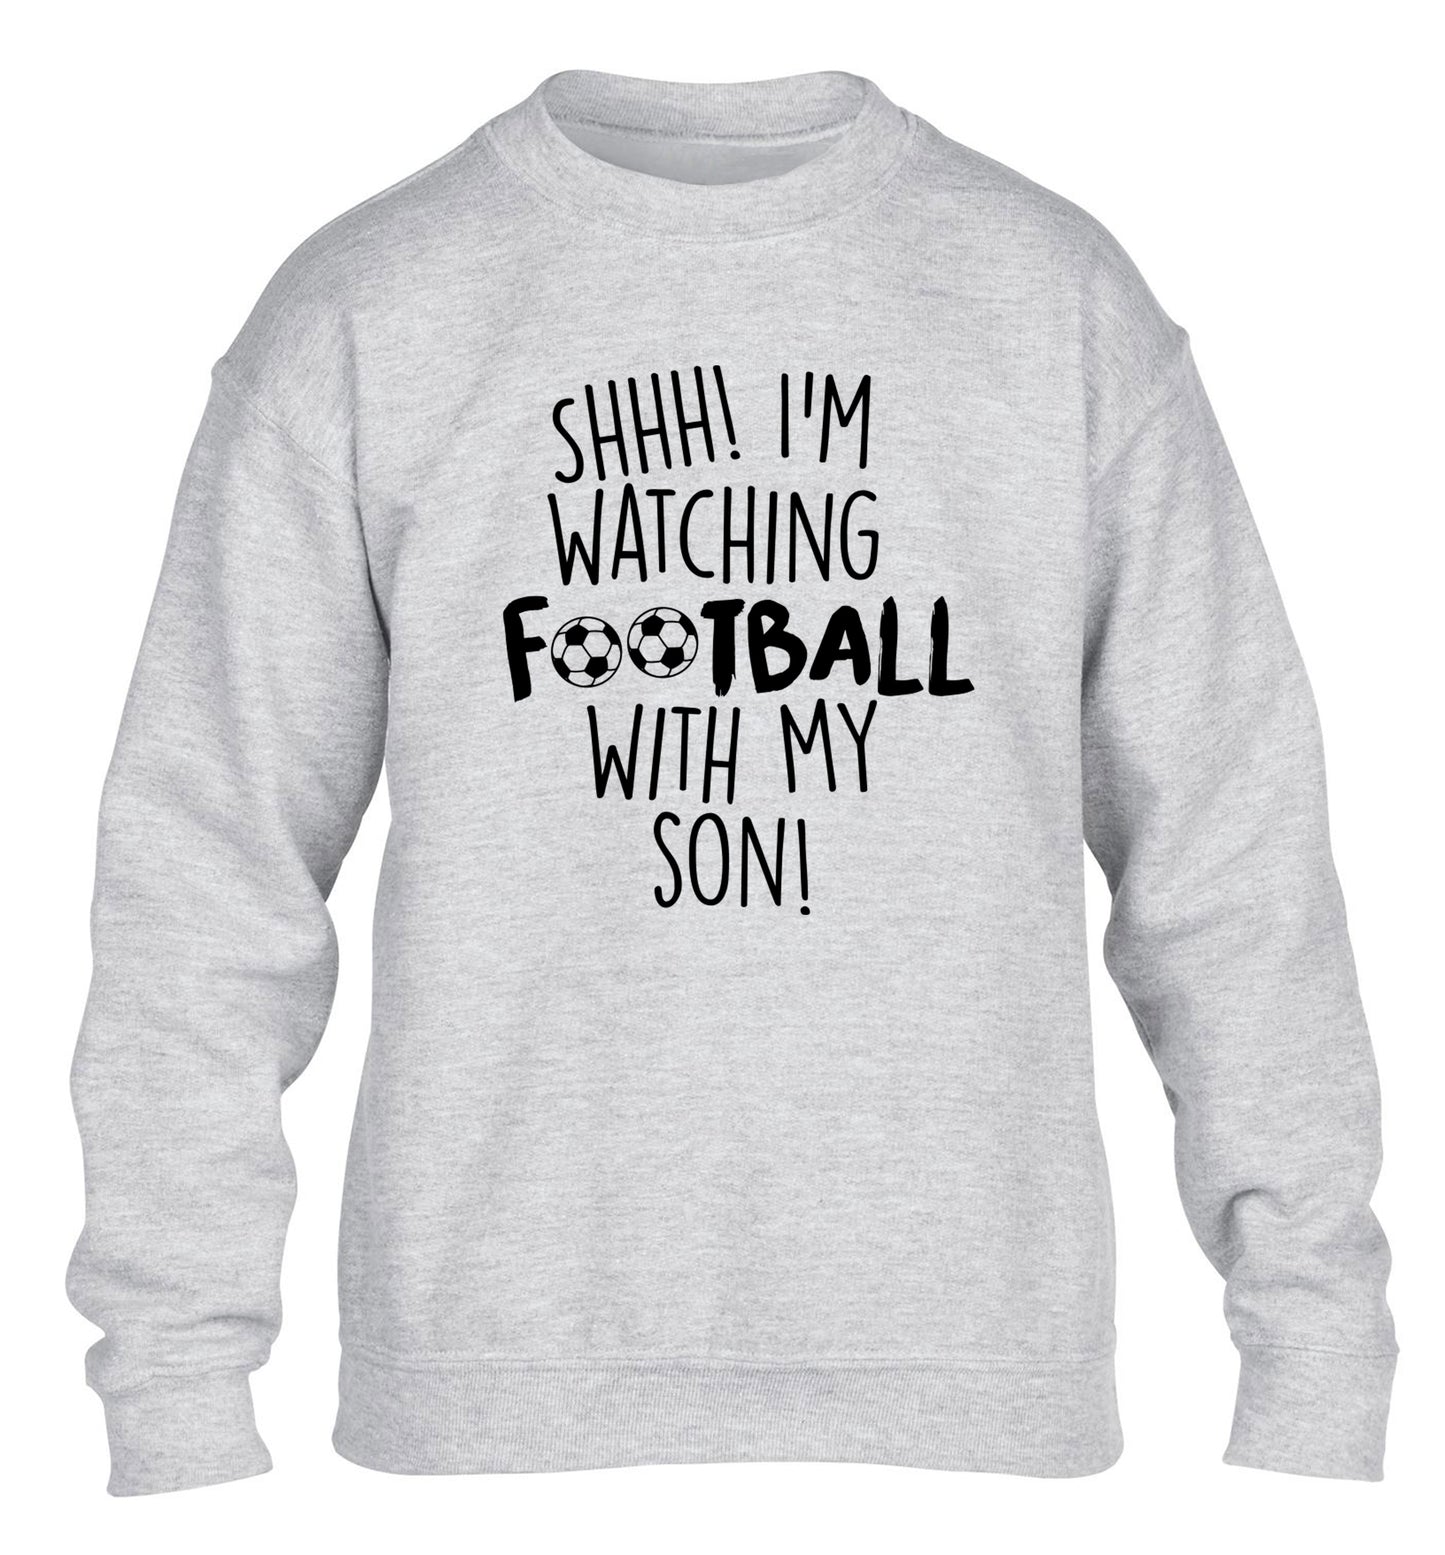 Shhh I'm watching football with my son children's grey sweater 12-14 Years